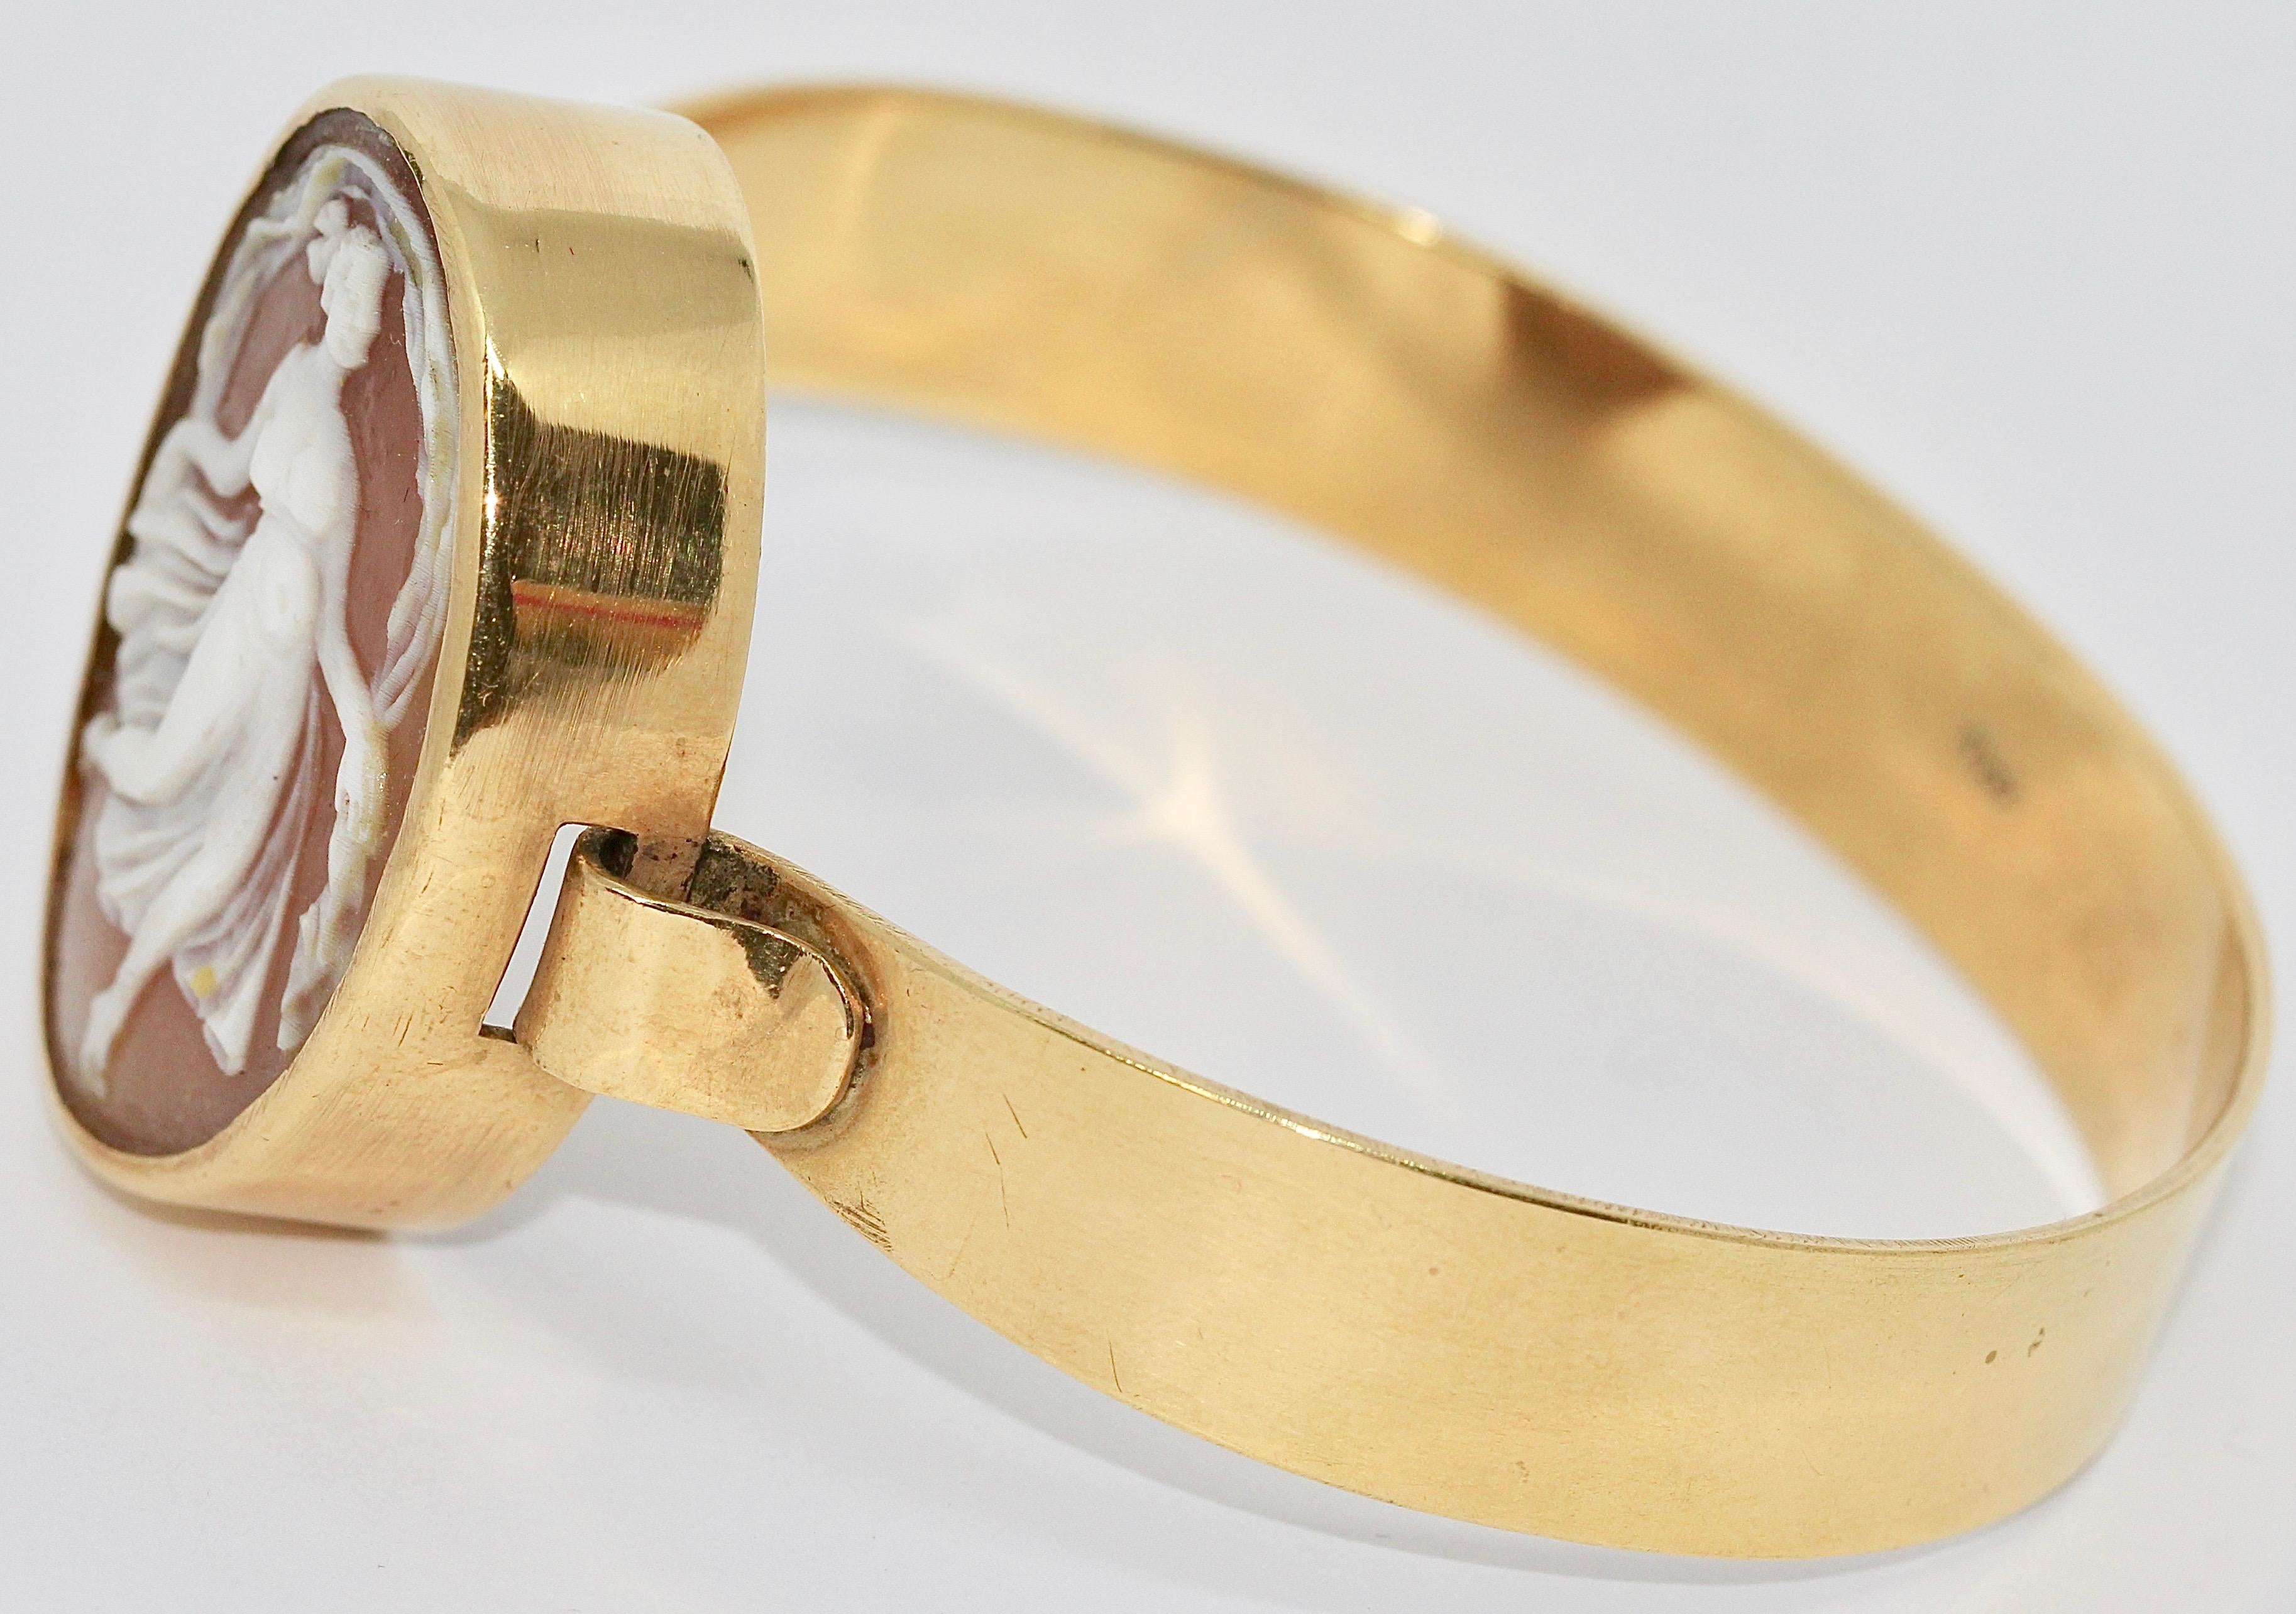 Beautiful bangle 18 Karat Gold with Cameo.

Dimensions of the oval head piece: 37mm x 28.5mm

Width of bangle 11-12 mm